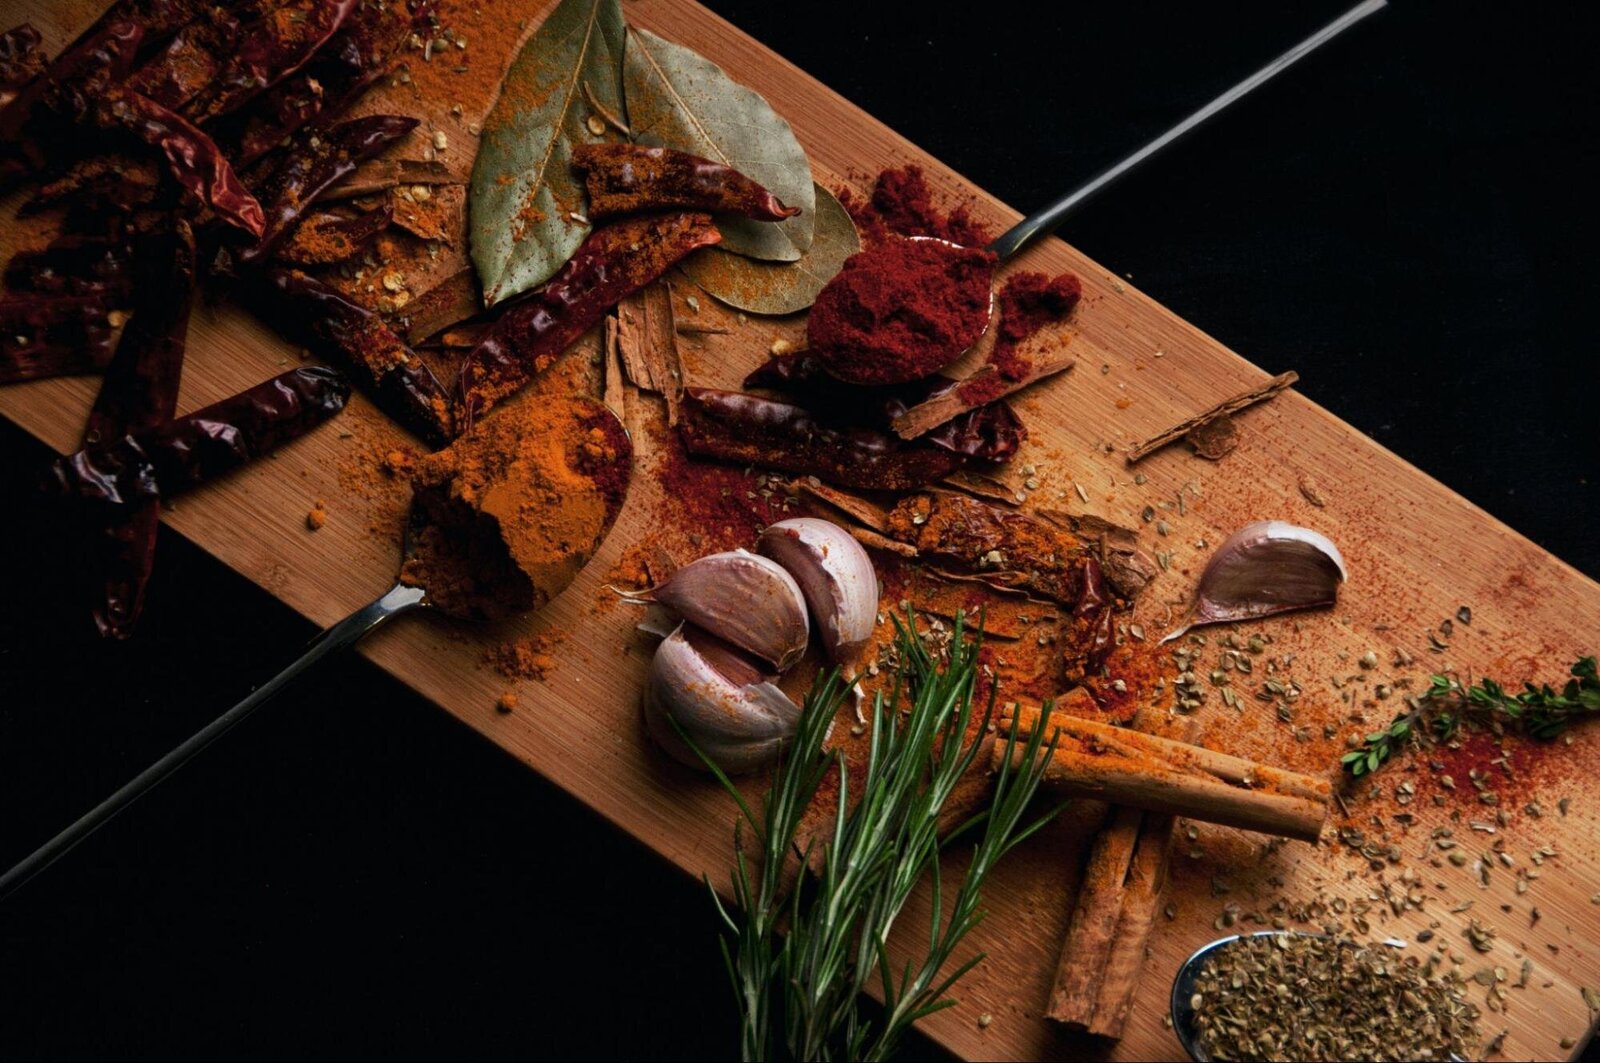 Image: cinnamon sticks, cloves, and various other spices on a brown wooden board